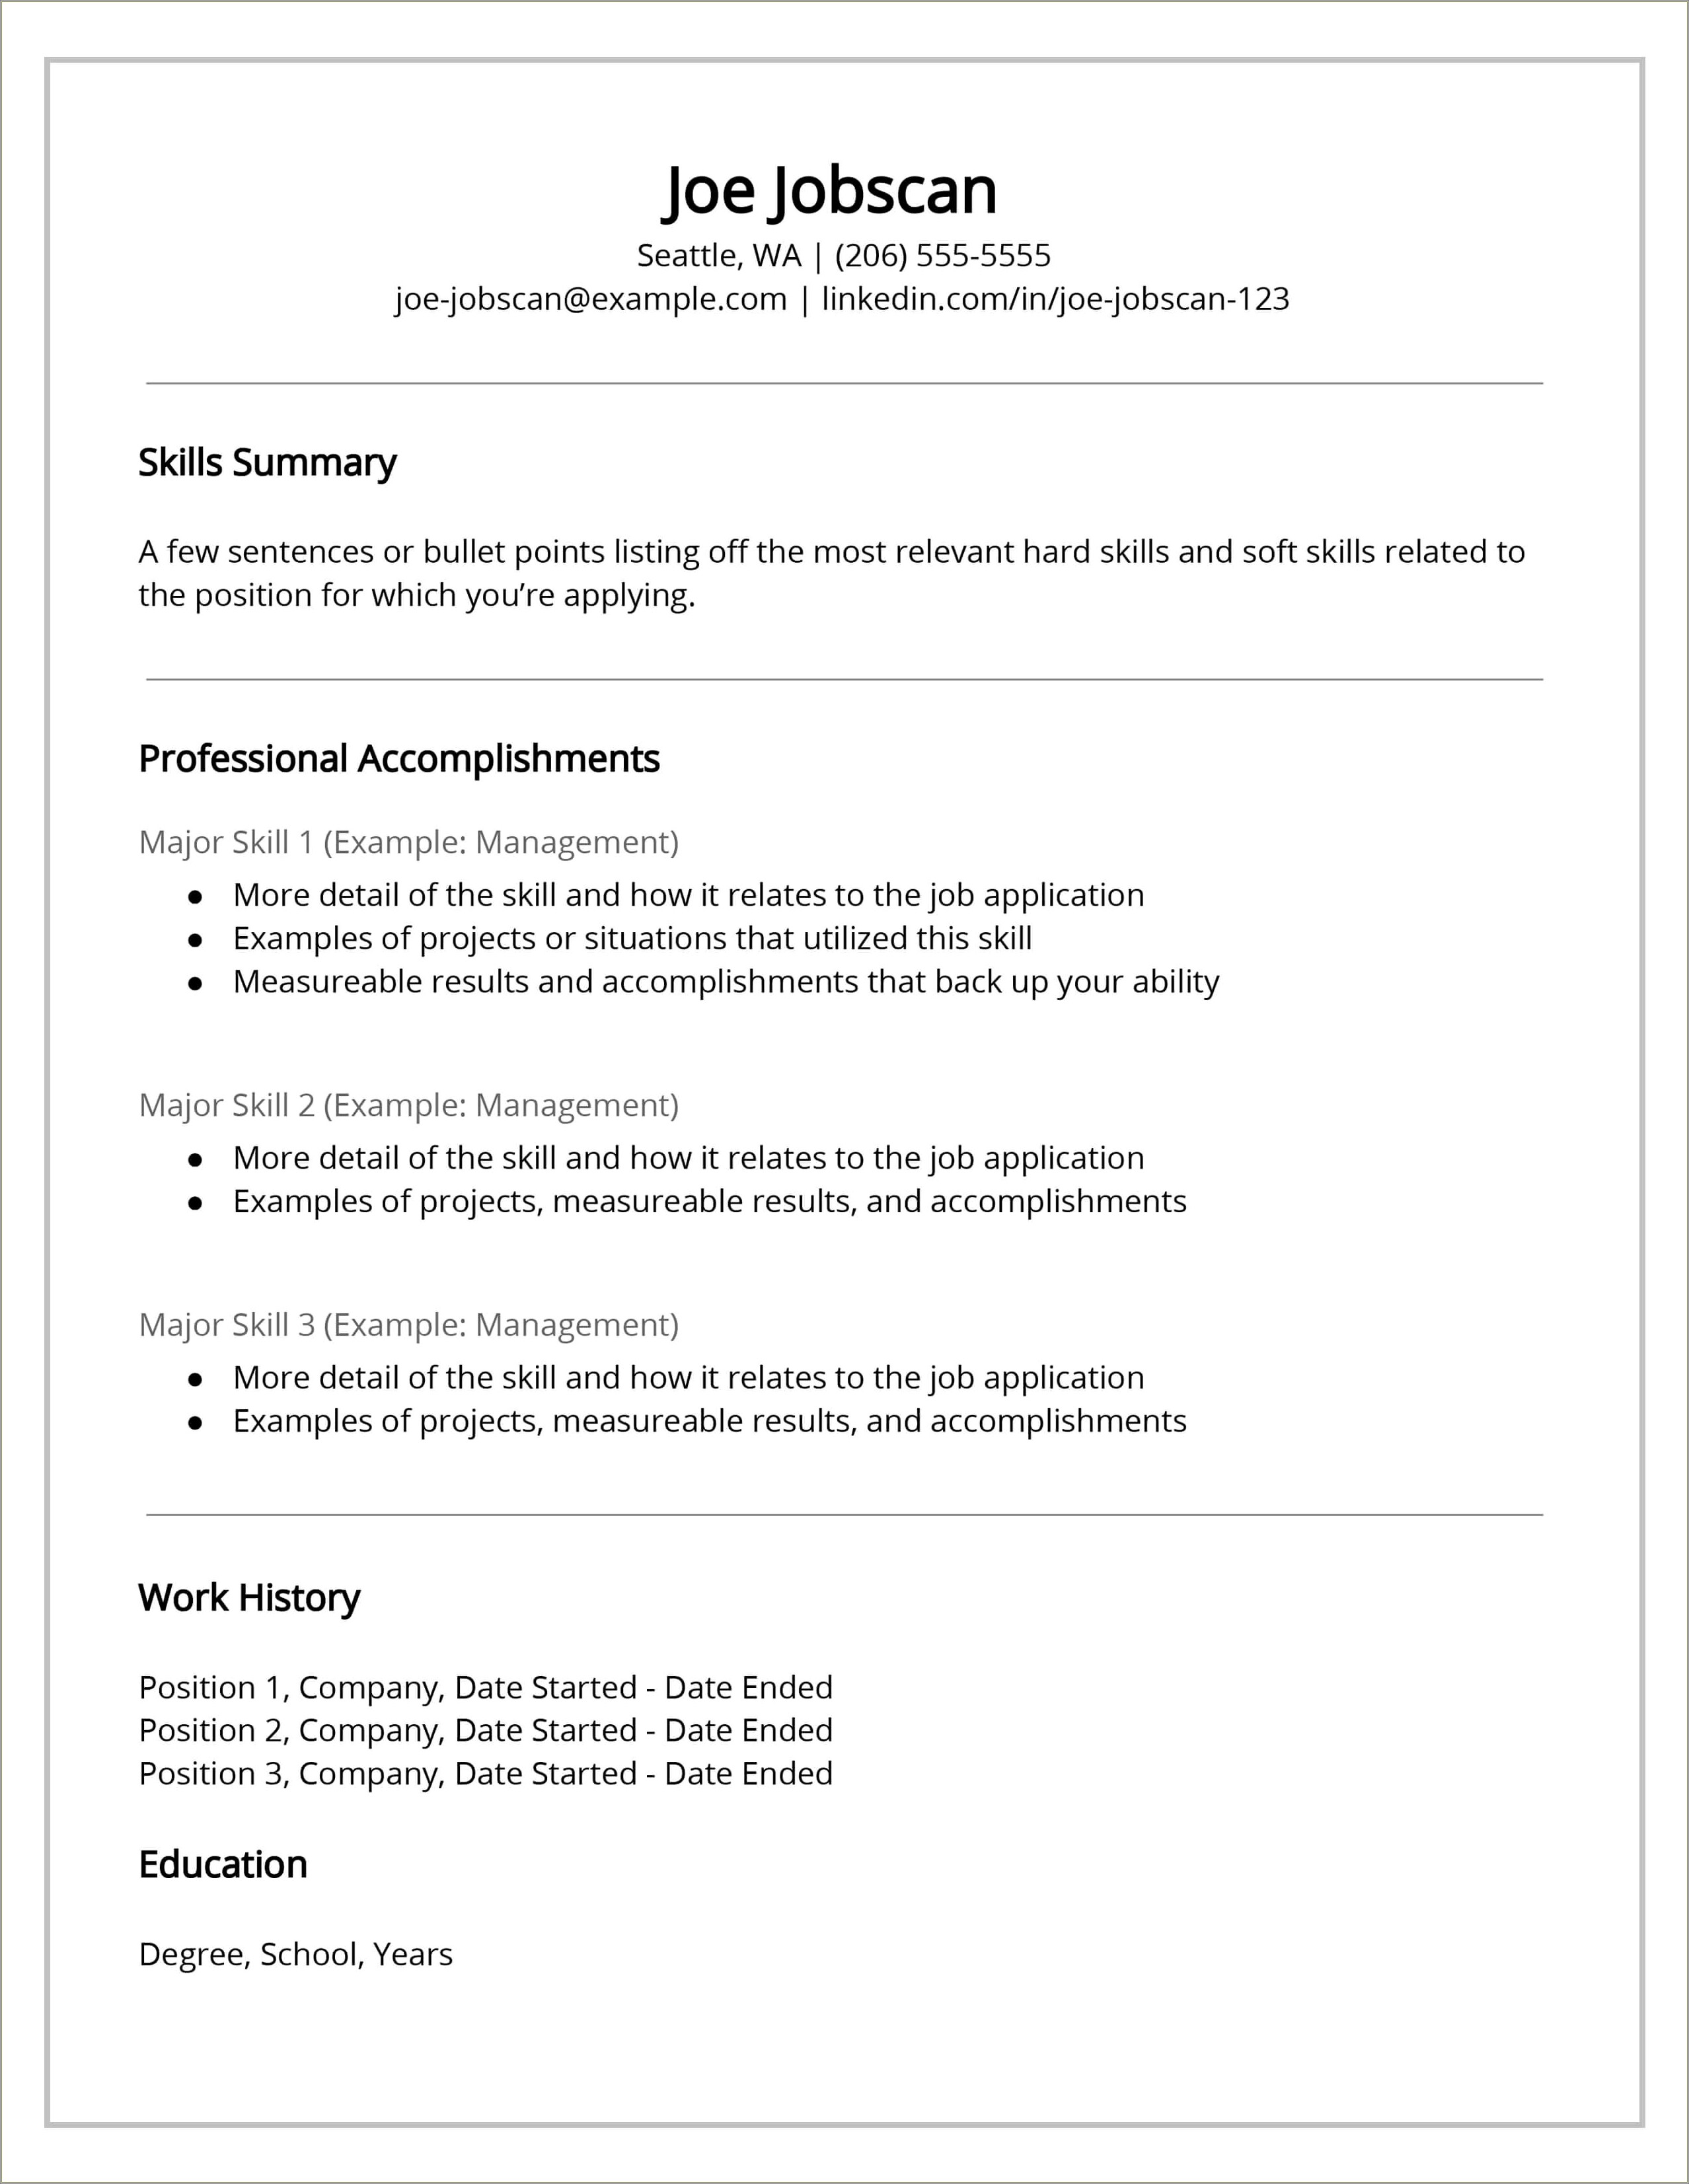 Match Qualifications And Skills To Job Resume Worksheet